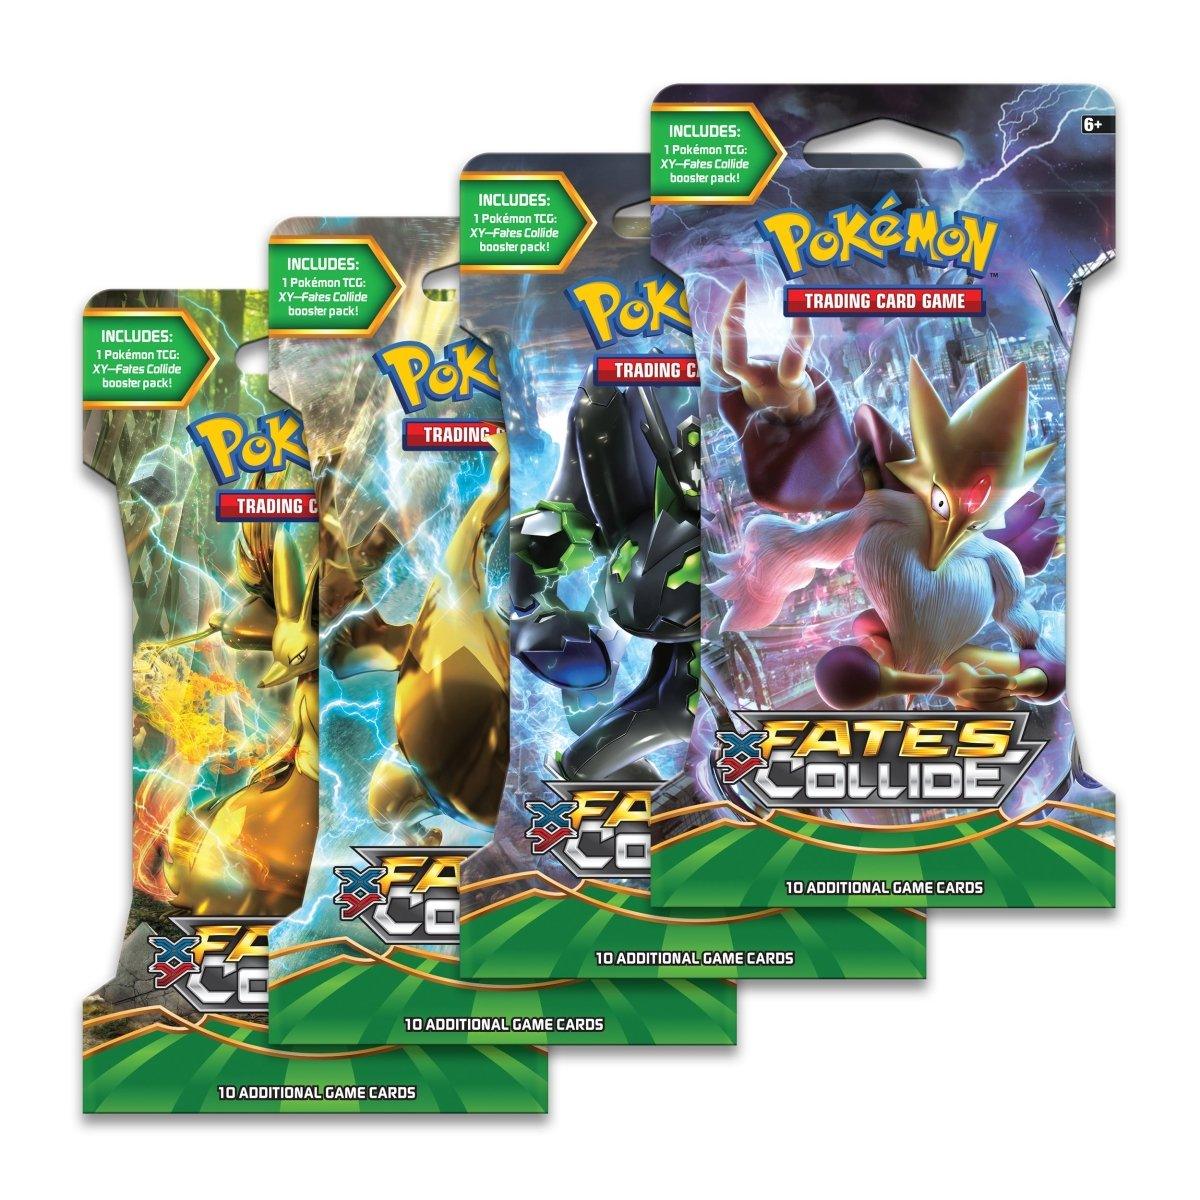 Pokemon Sleeved Booster Pack (10 Cards) - XY - Fates Collide - Hobby Champion Inc